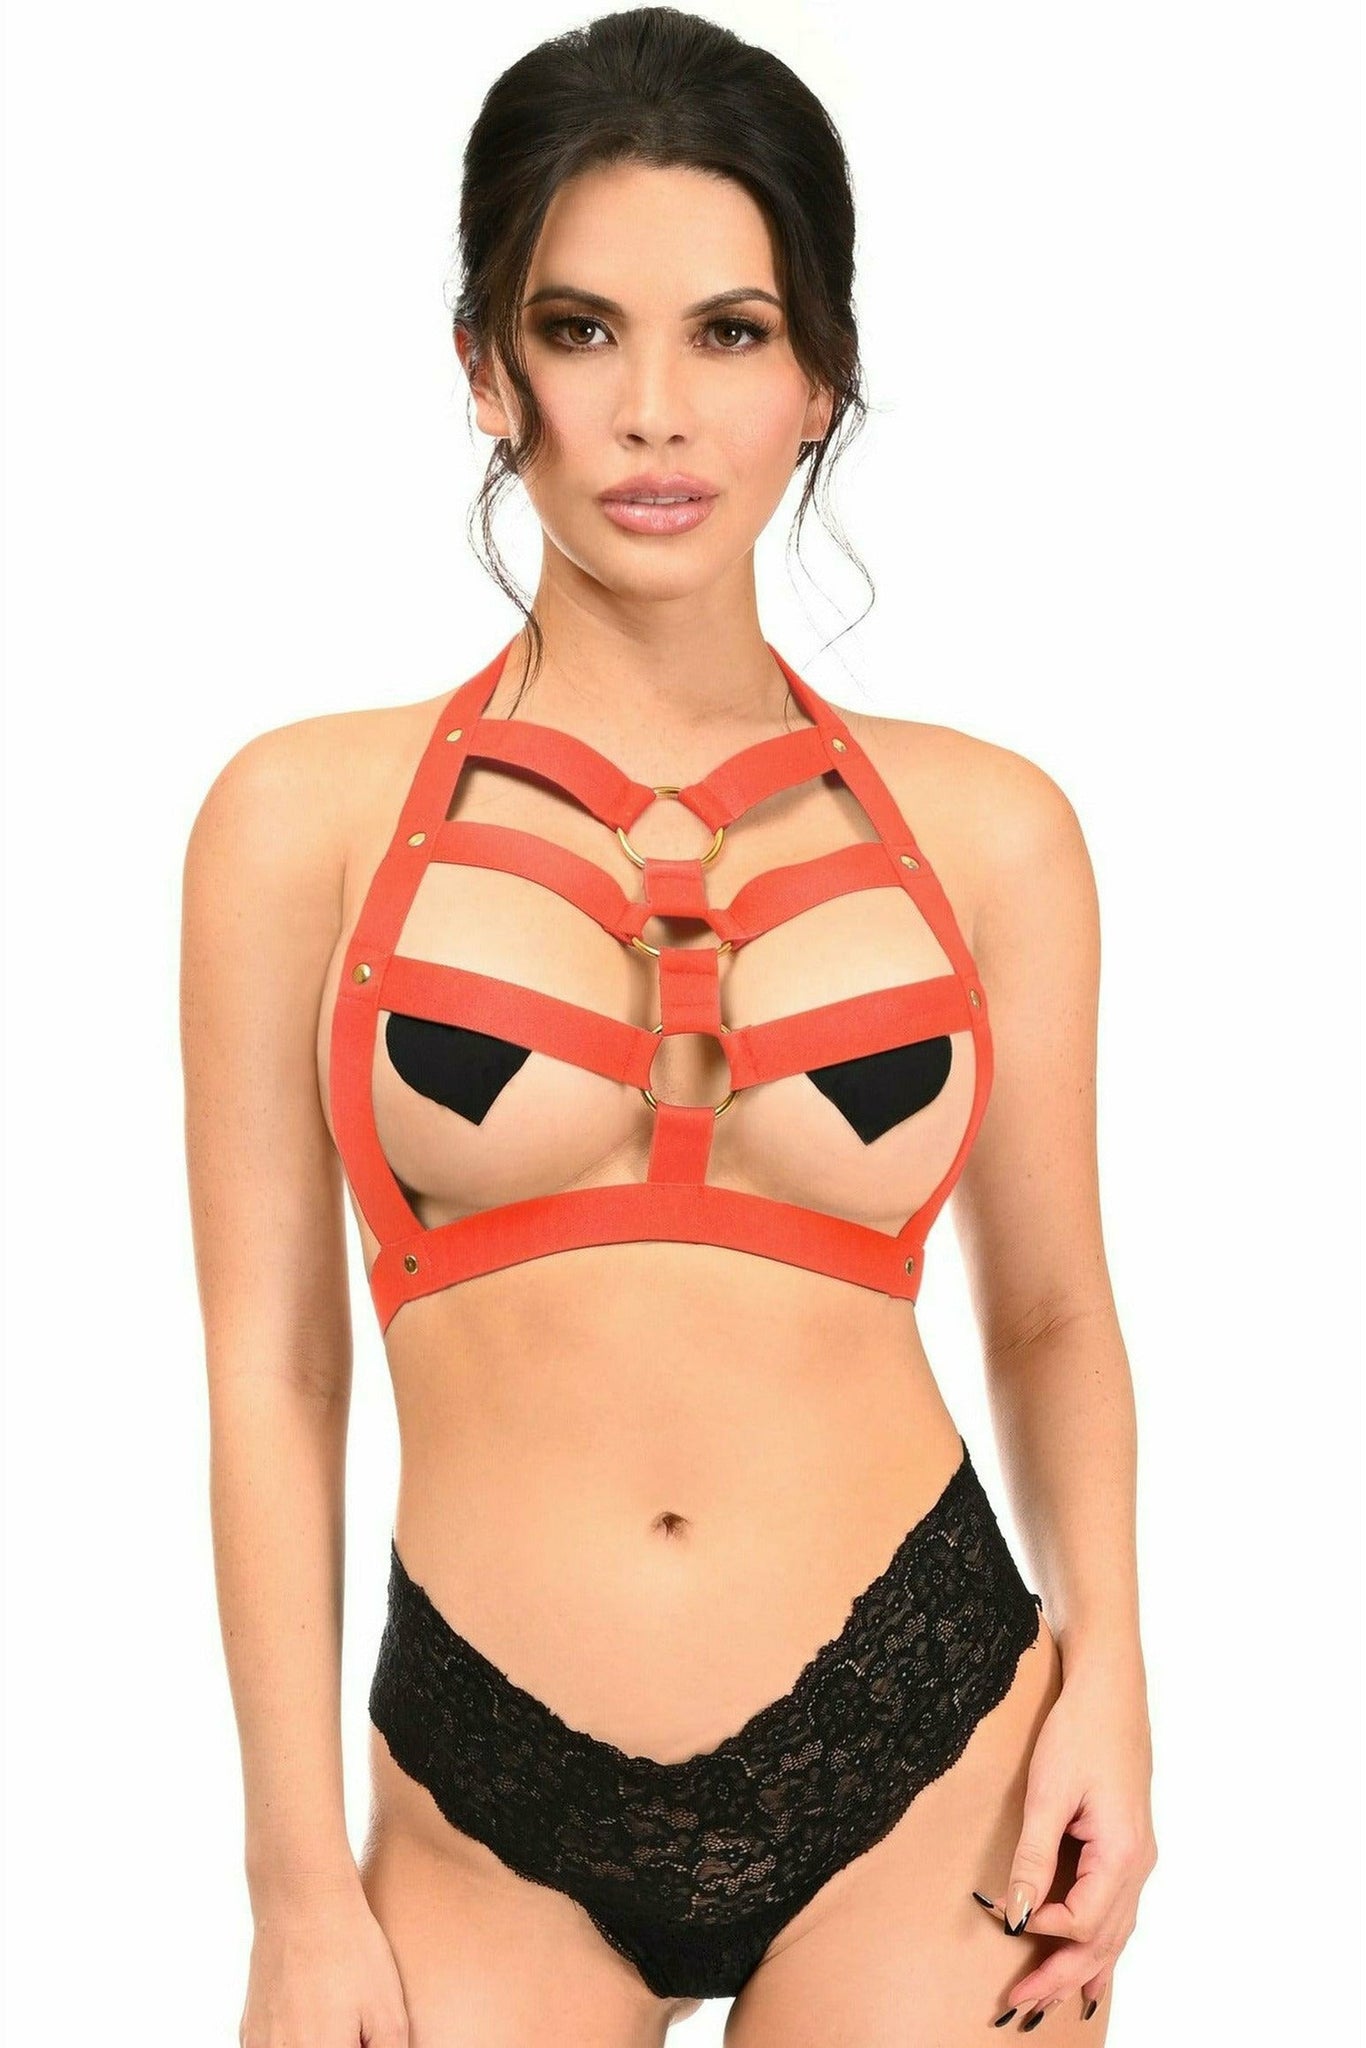 Stretchy Body Harness with Gold Hardware in 4 Sexy Color Choices